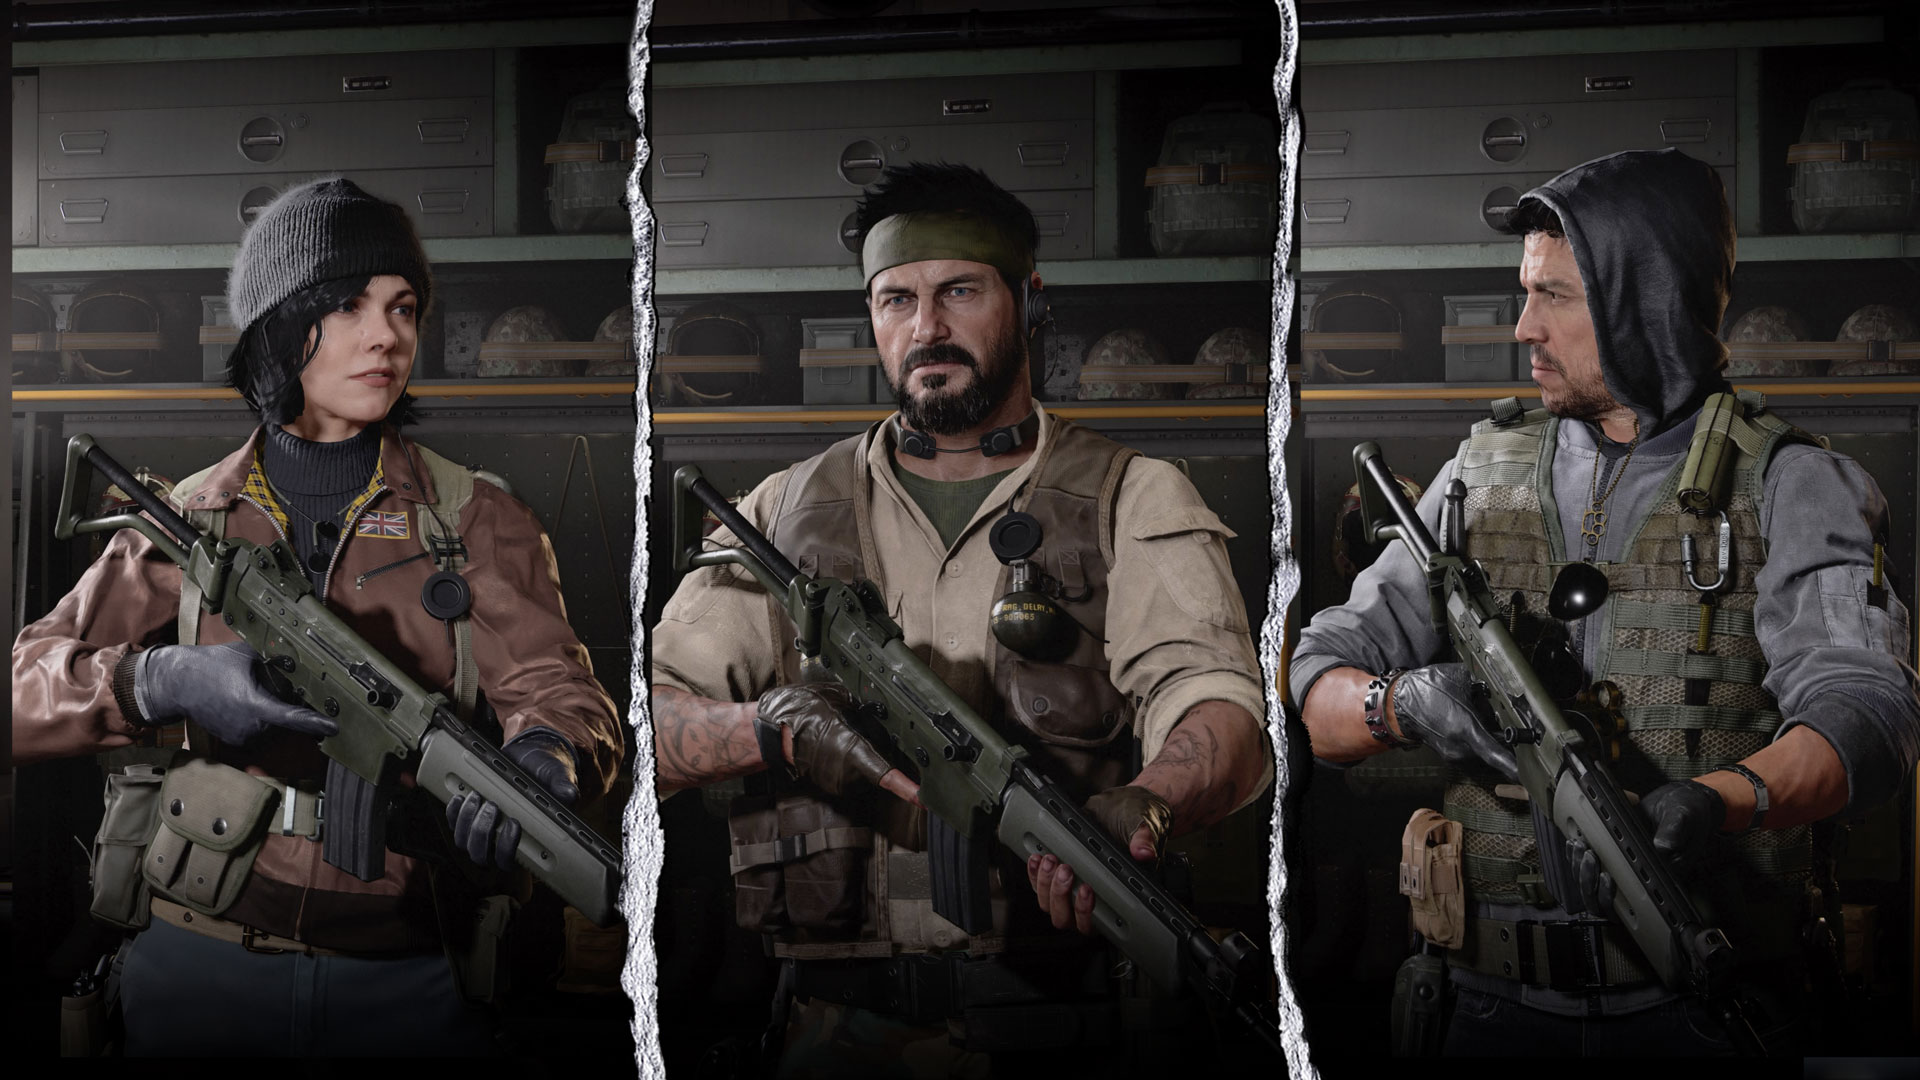 Meet the Operators of Call of Duty ®: Black Ops Cold War.